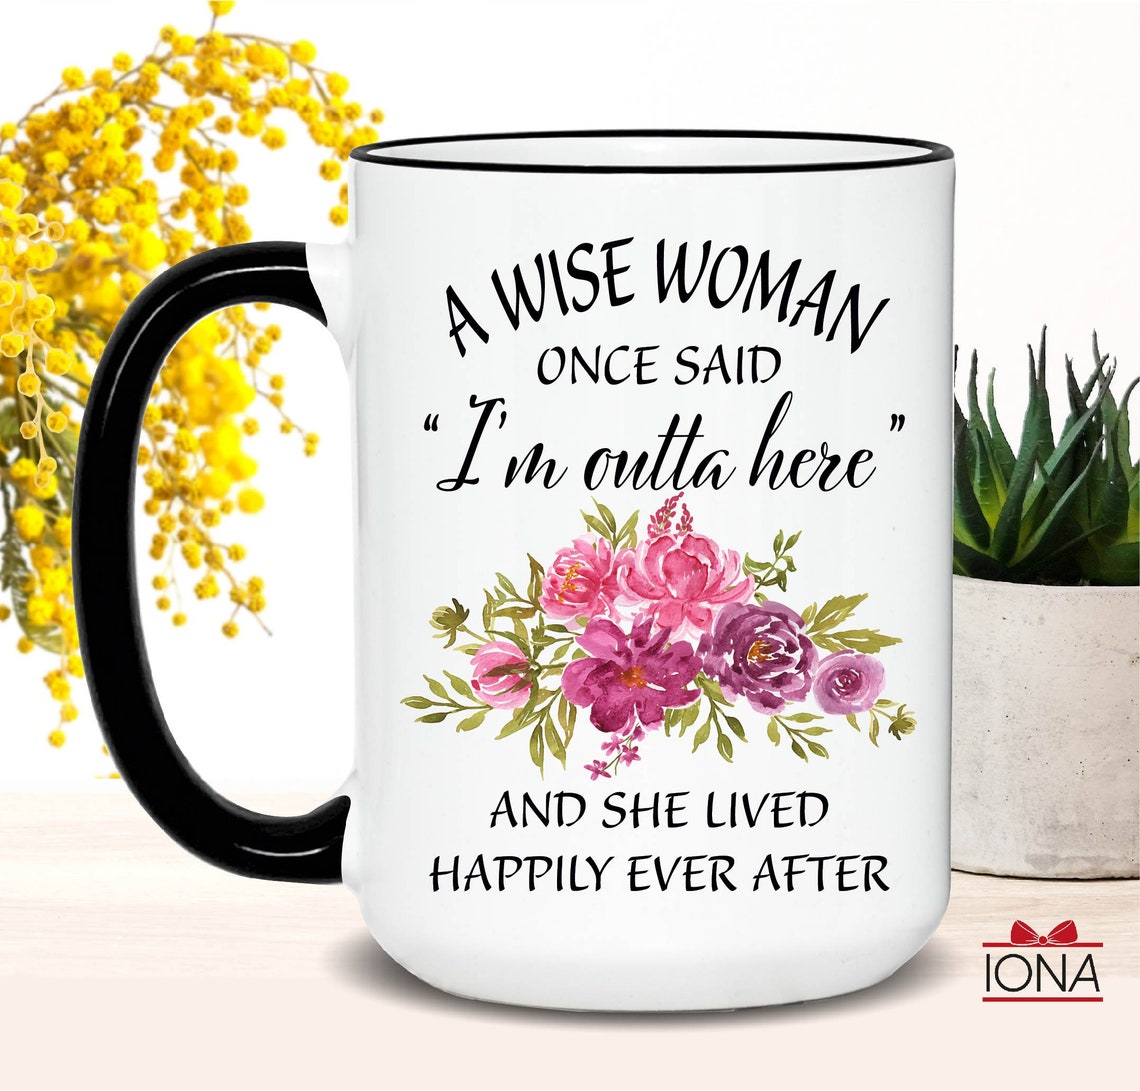 Retirement Gifts for Women - A Wise Woman Once Said - Funny Retirement Gift for Women from Coworker - Happy Retirement